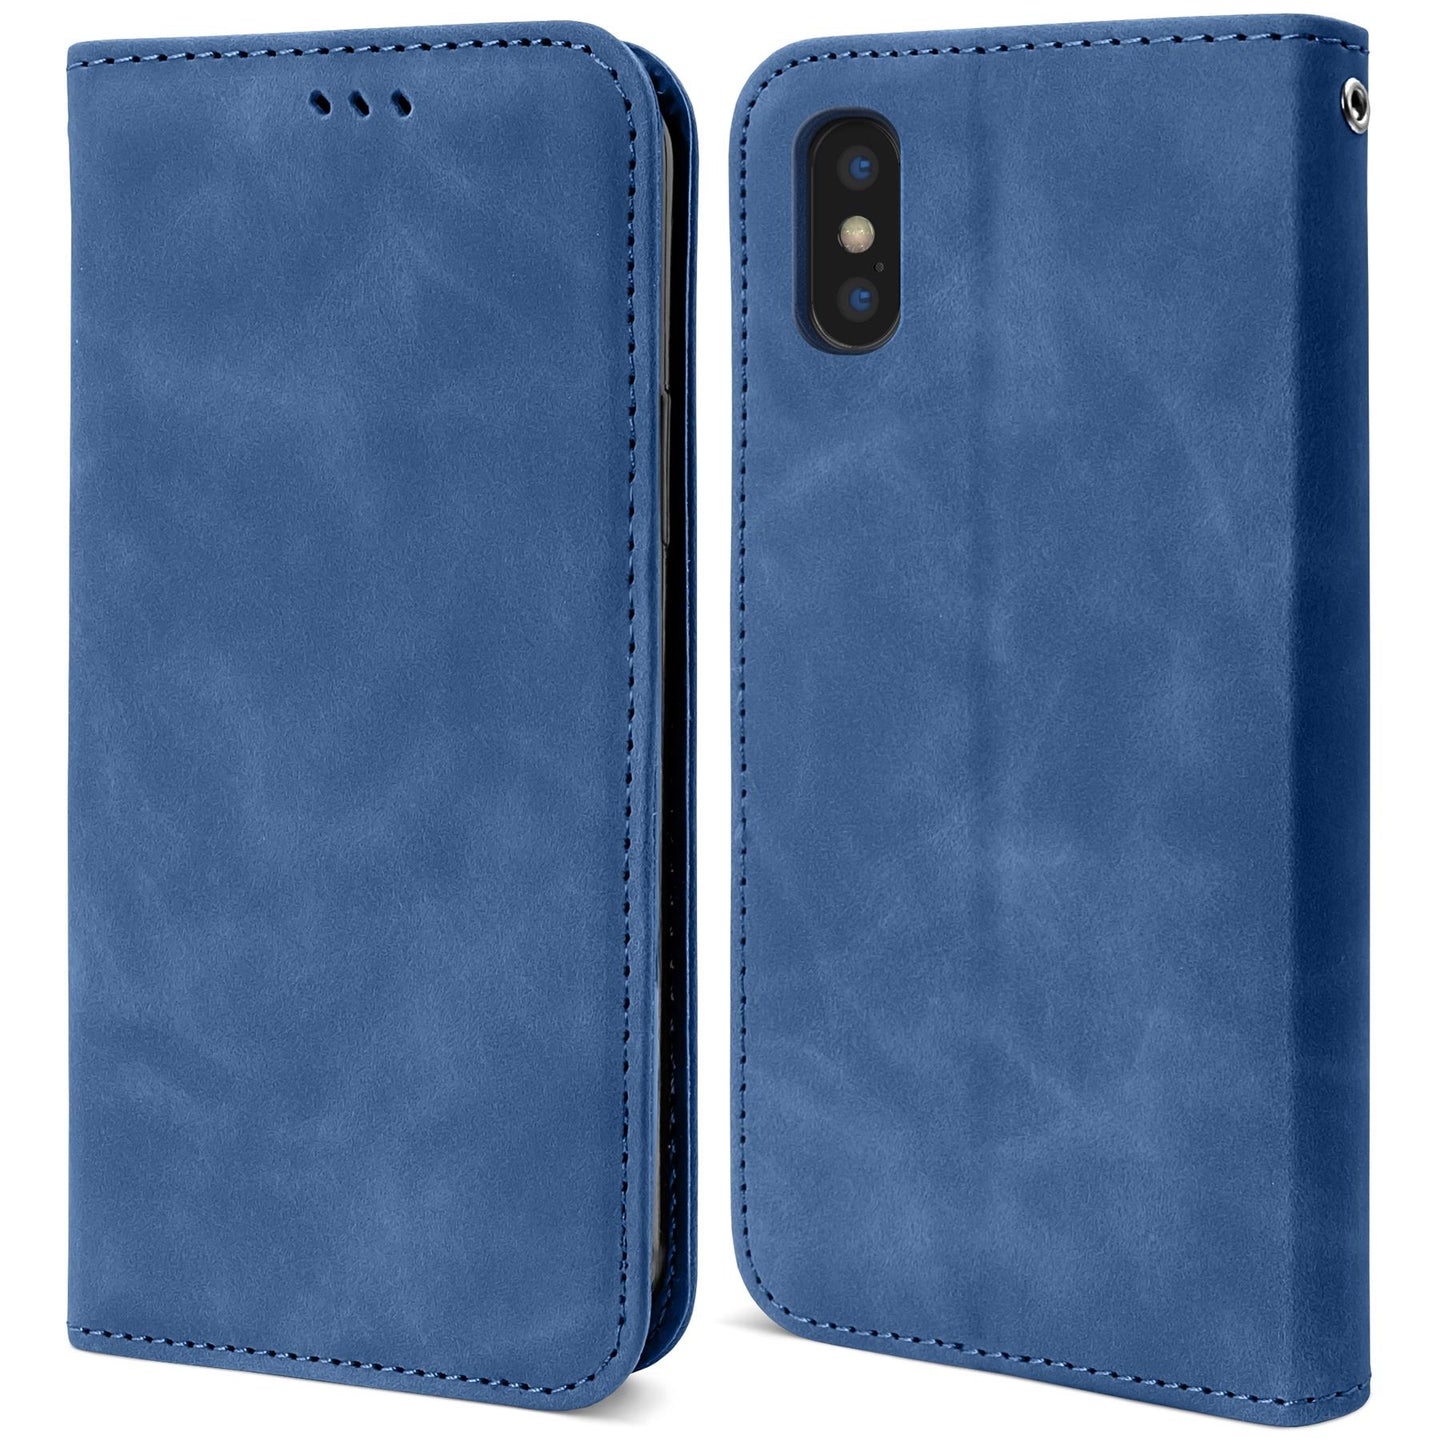 Moozy Marble Blue Flip Case for iPhone X, iPhone XS - Flip Cover Magnetic Flip Folio Retro Wallet Case with Card Holder and Stand, Credit Card Slots, Kickstand Function